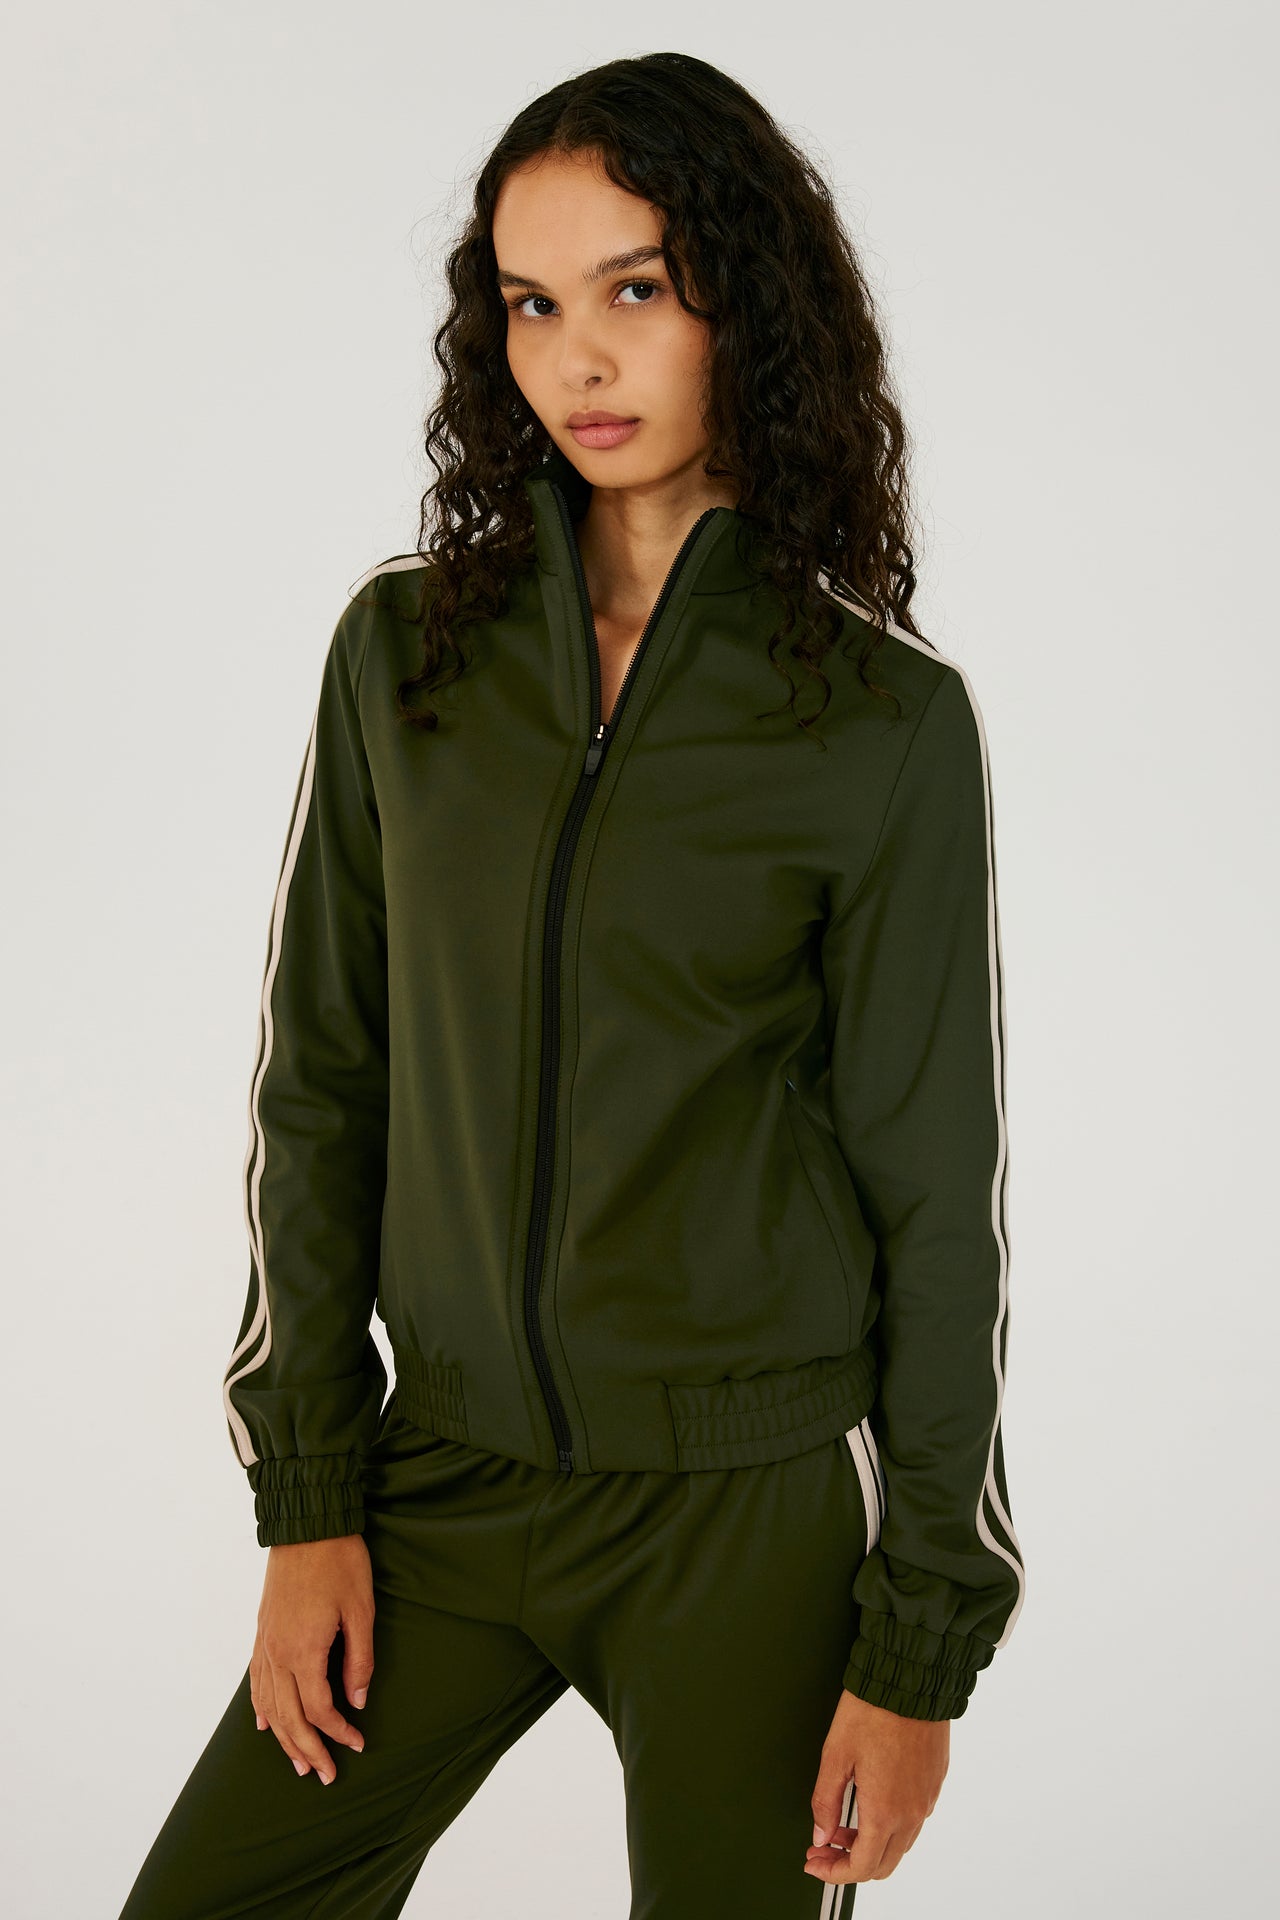 Front view of girl wearing dark green zip jacket that stops under chin with two white stripes down the side and a dark green sweatpants